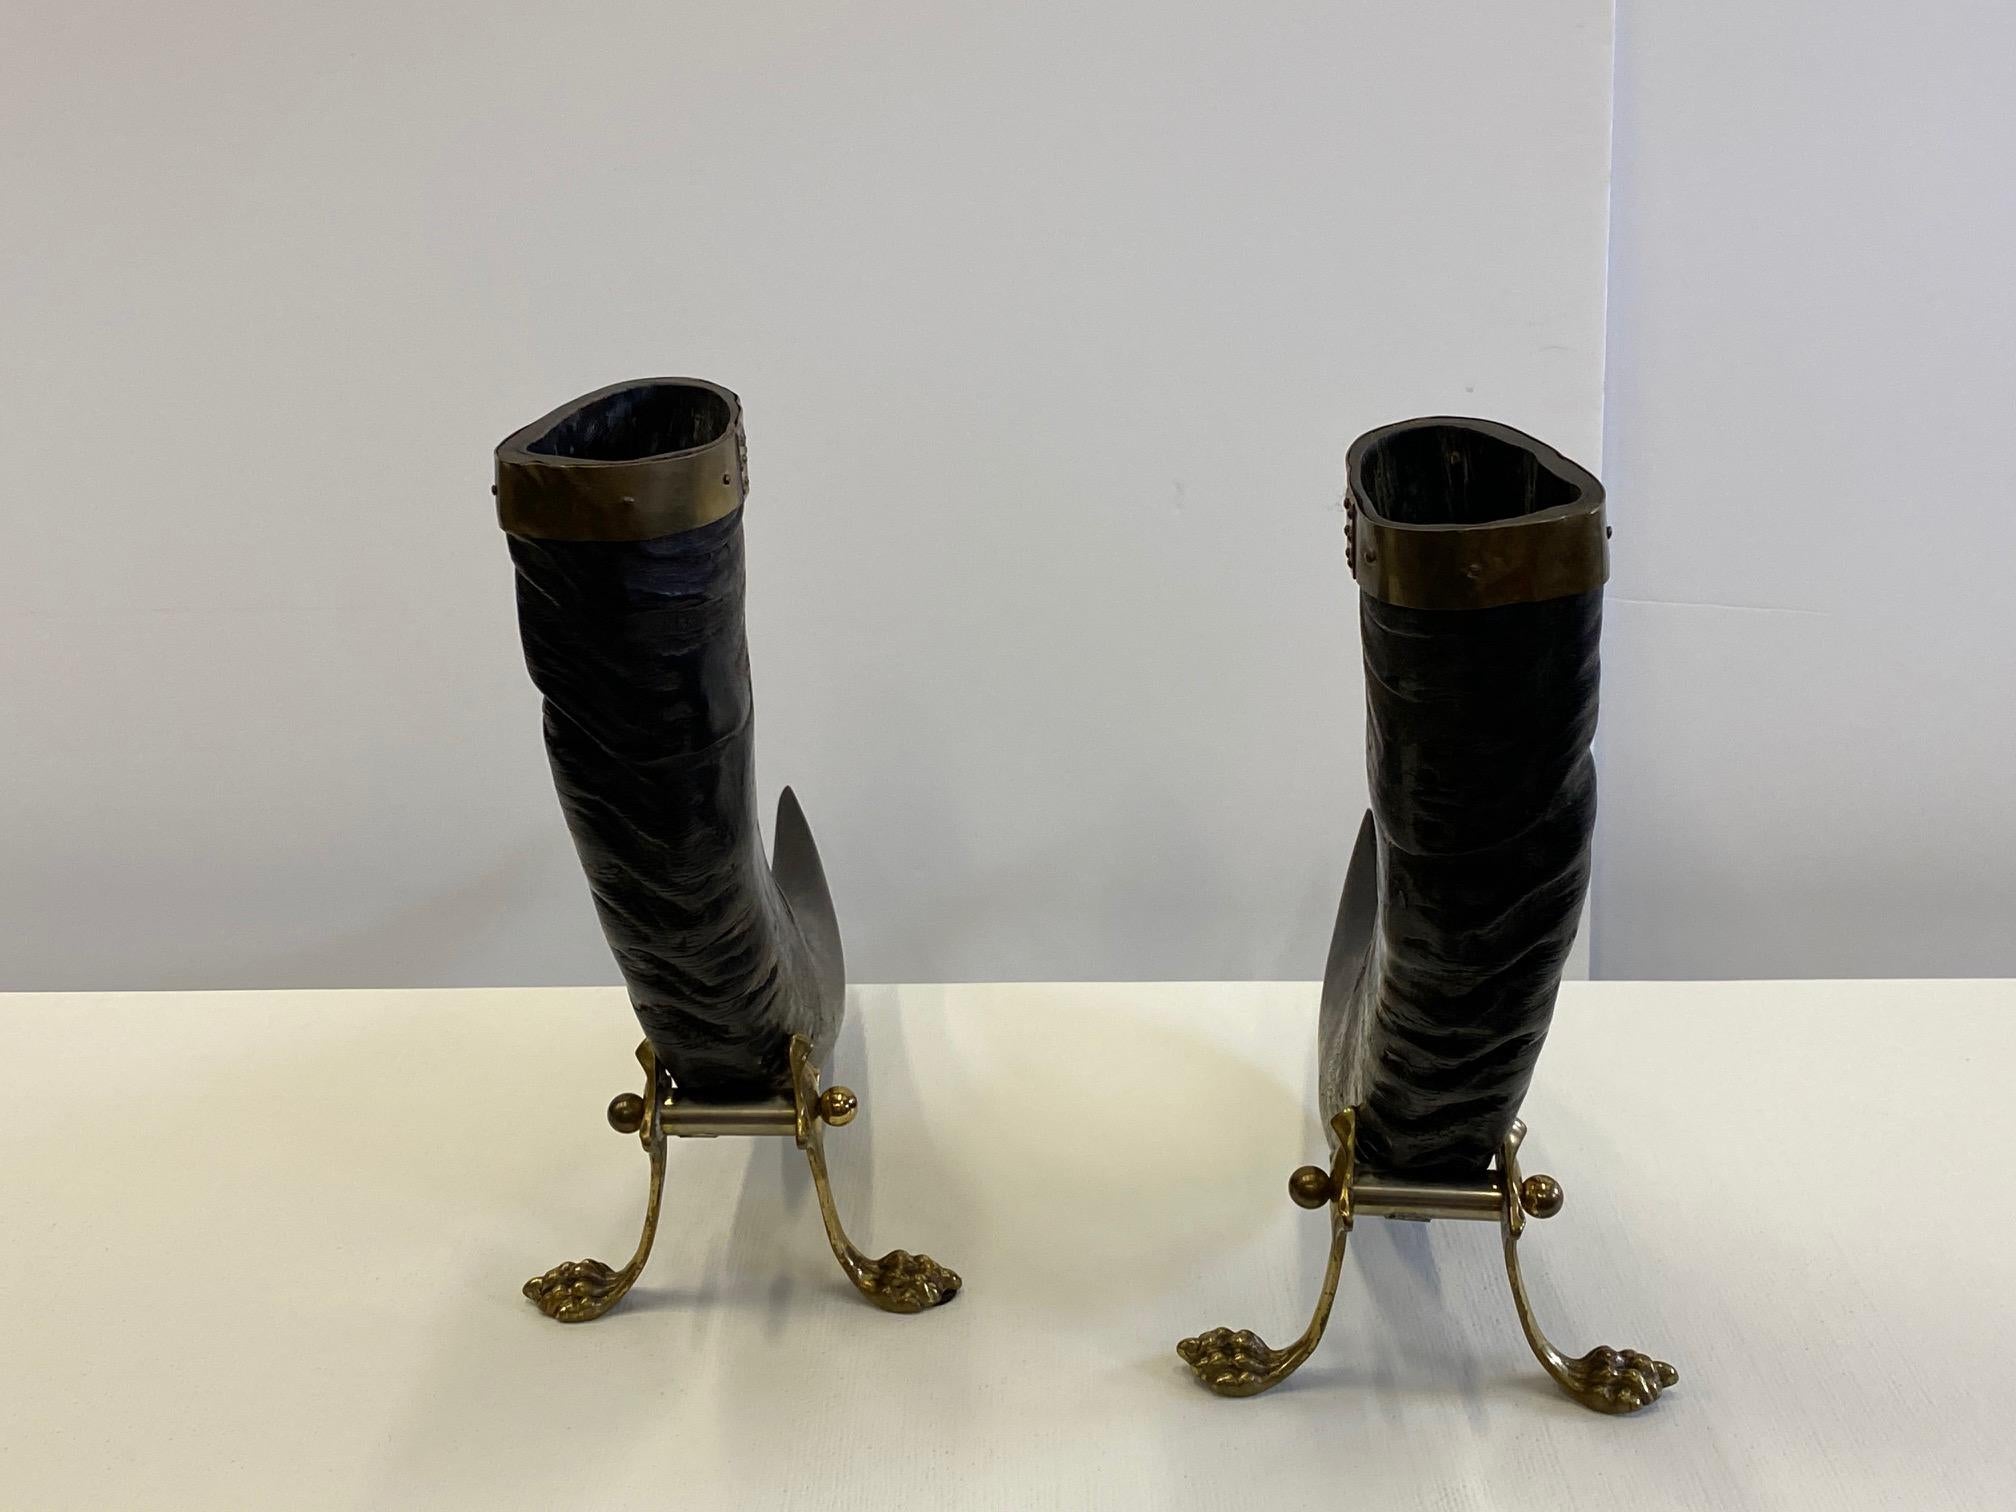 Striking Pair of Sculptural Authentic Buffalo Horns with Brass Mounts and Bases 4